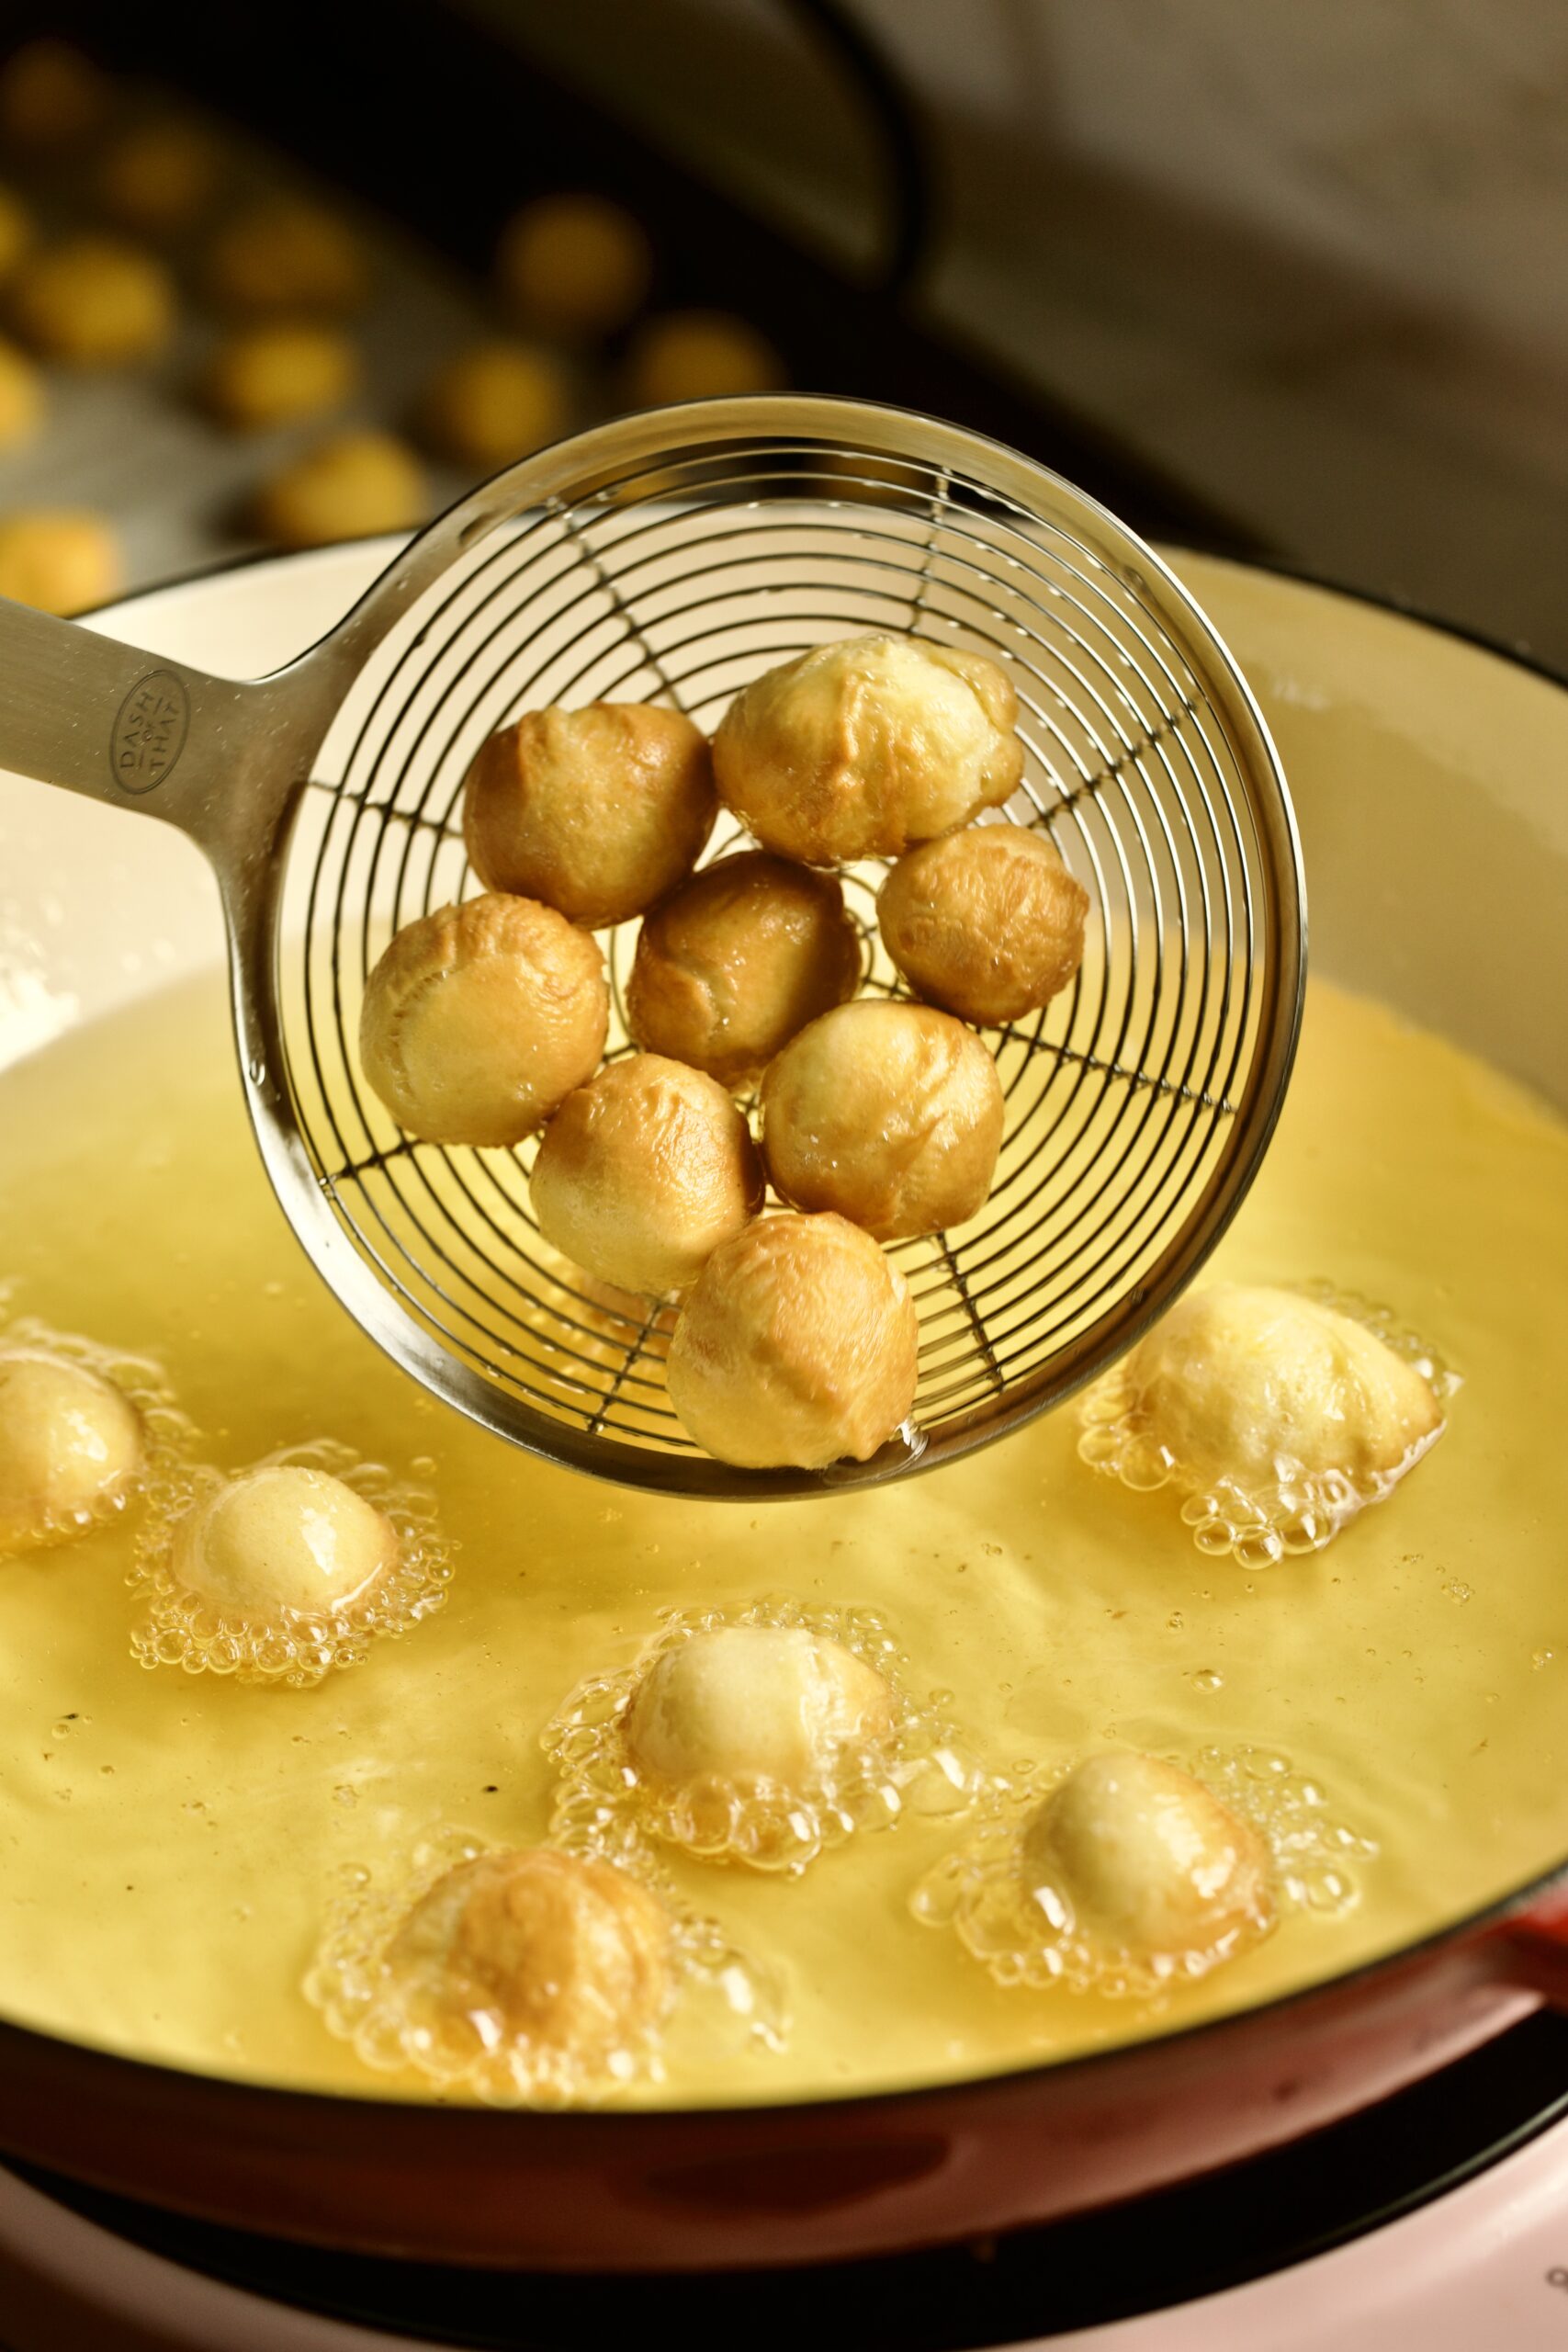 process of making authentic struffoli recipe: dough balls taken out of frying oil with slotted spoon.